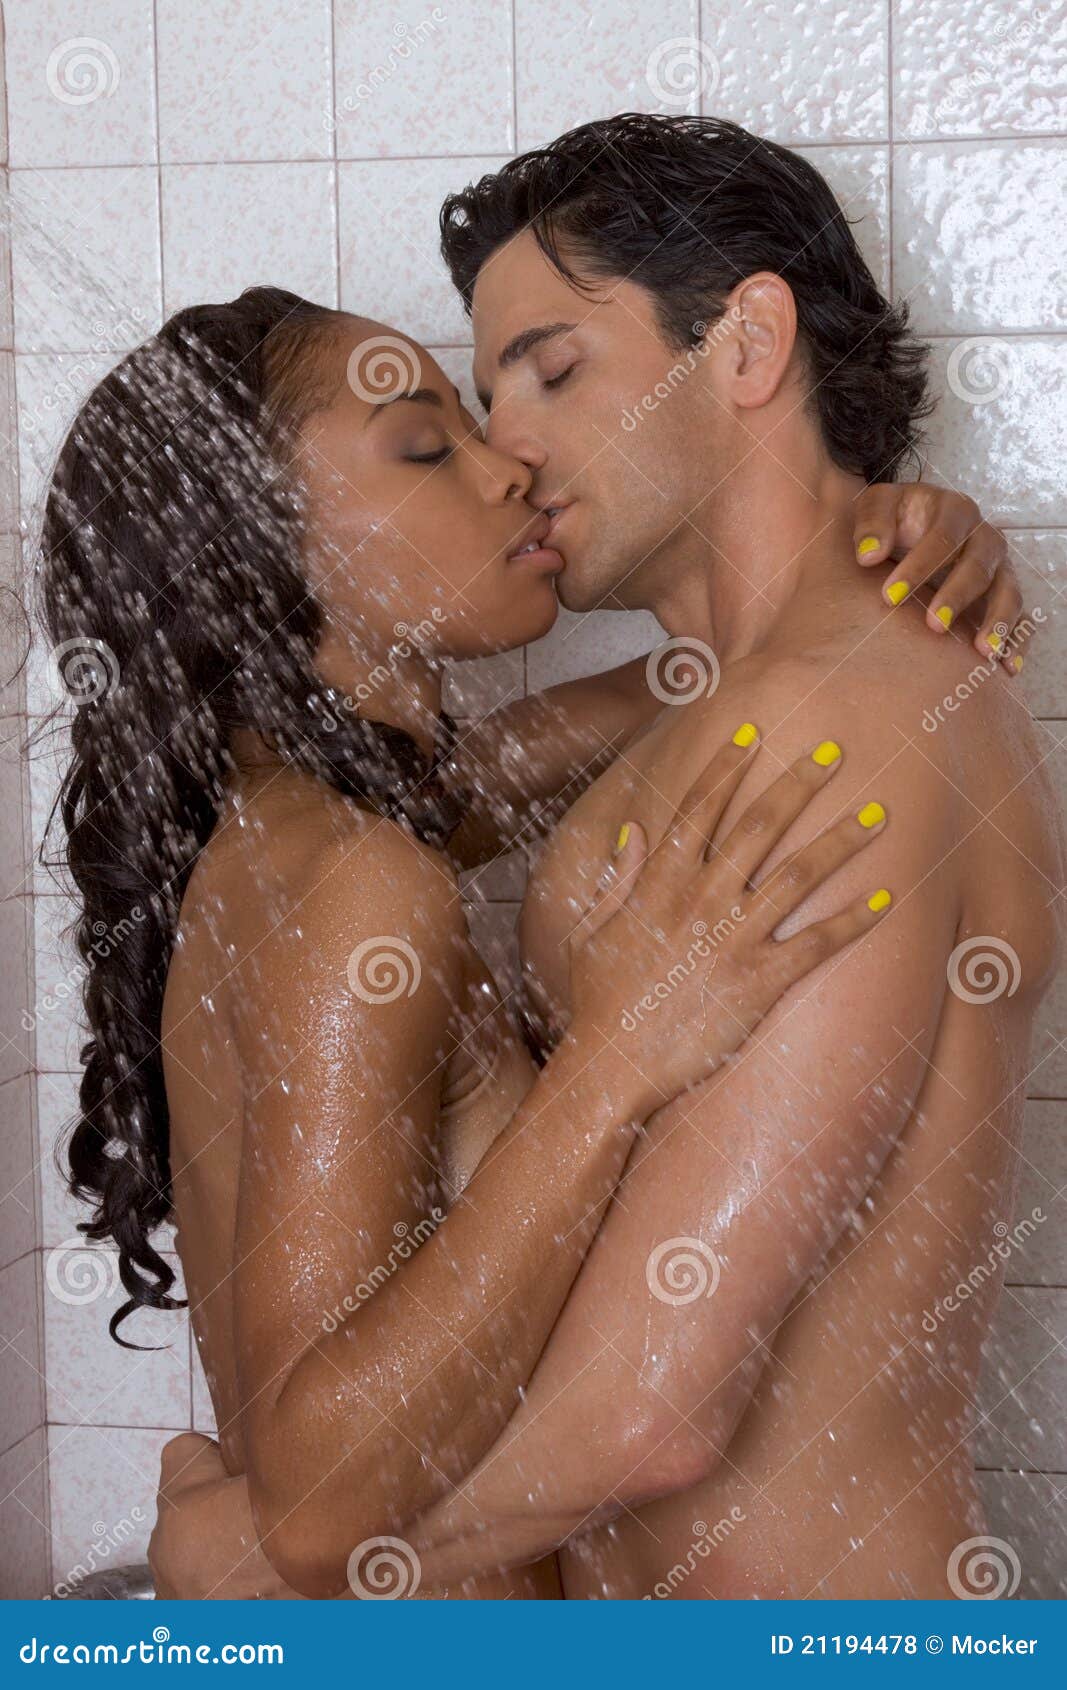 Free Videos Of Women Kissing In The Shower 11